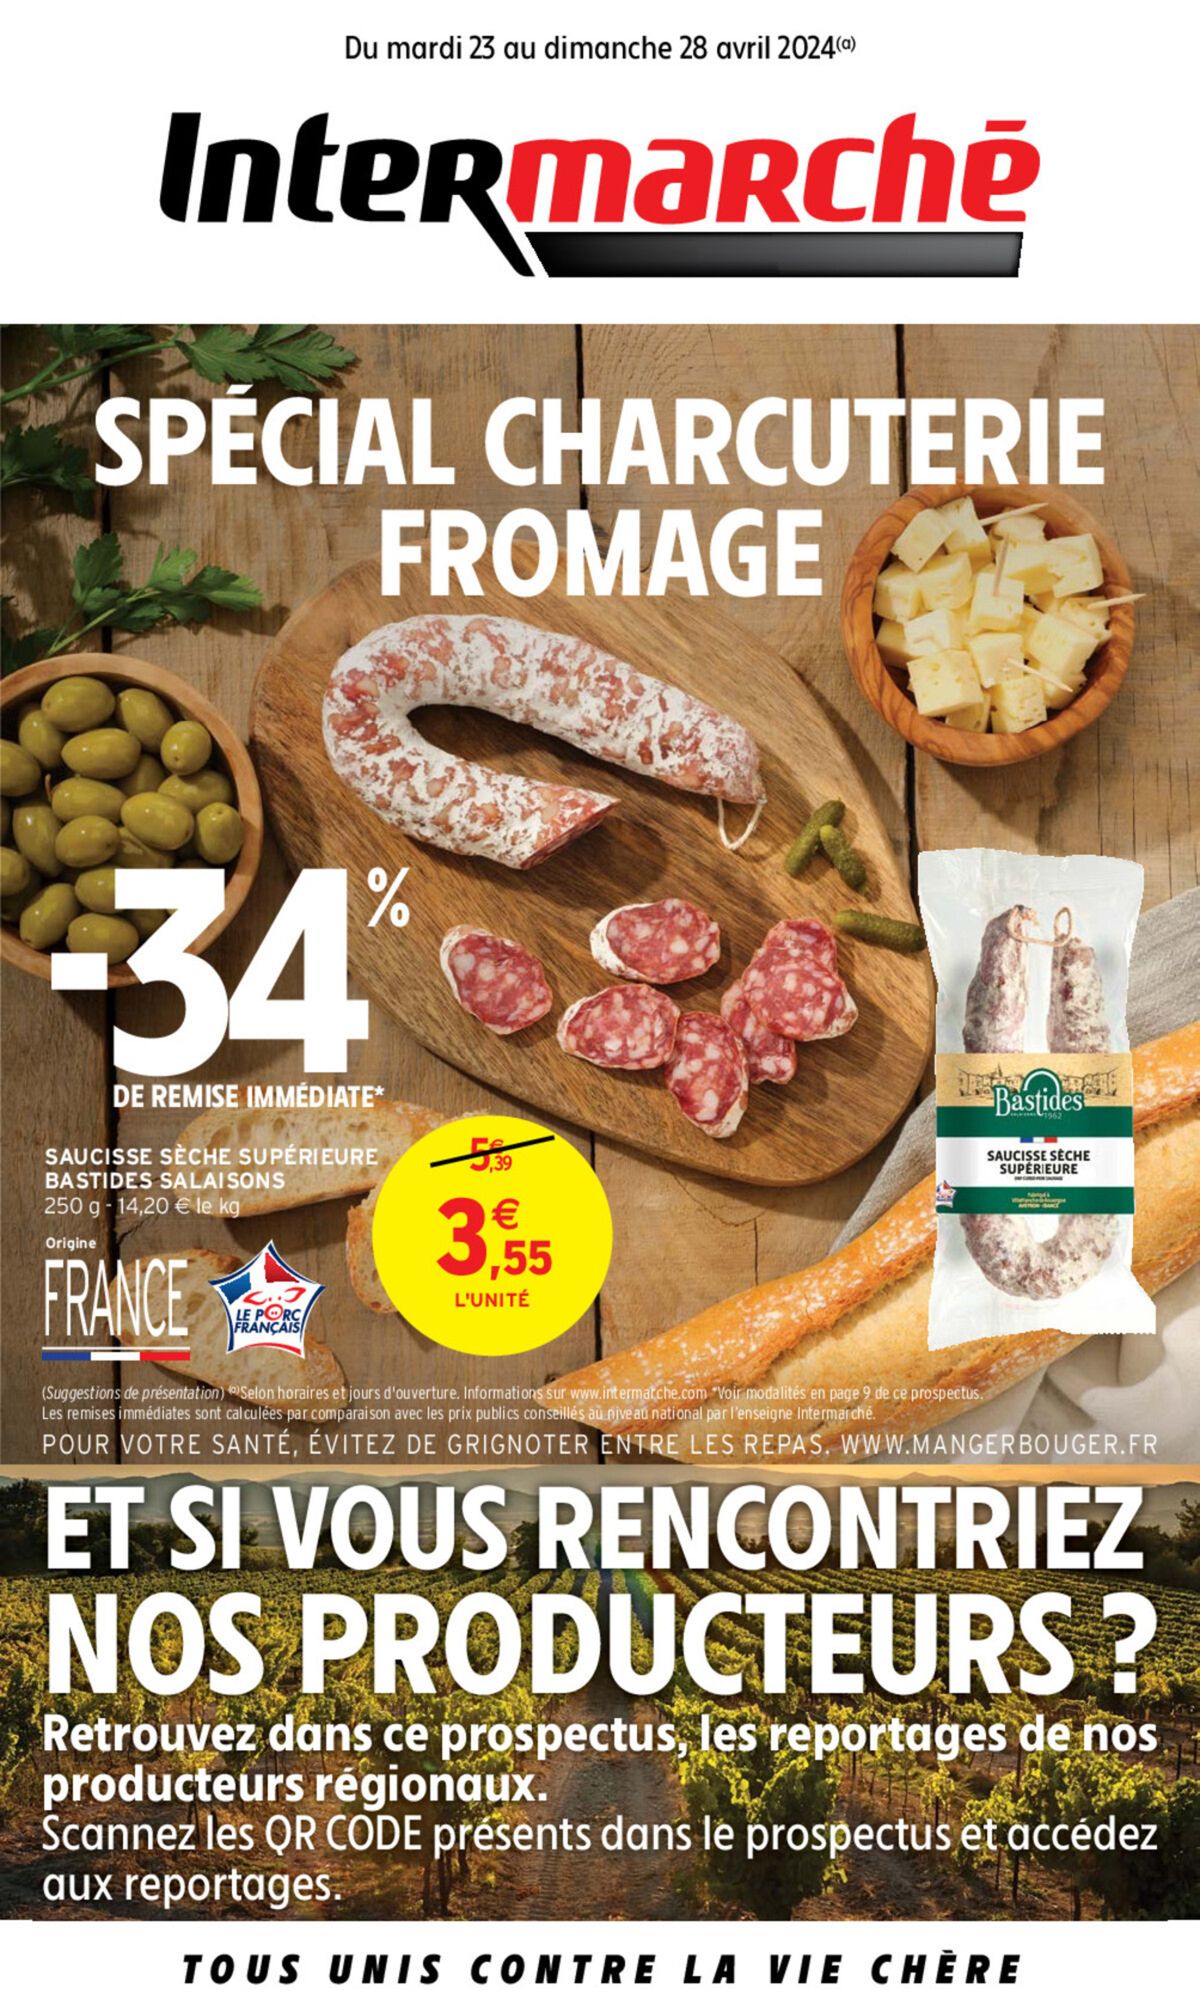 Catalogue SPÉCIAL CHARCUTERIE FROMAGE, page 00001